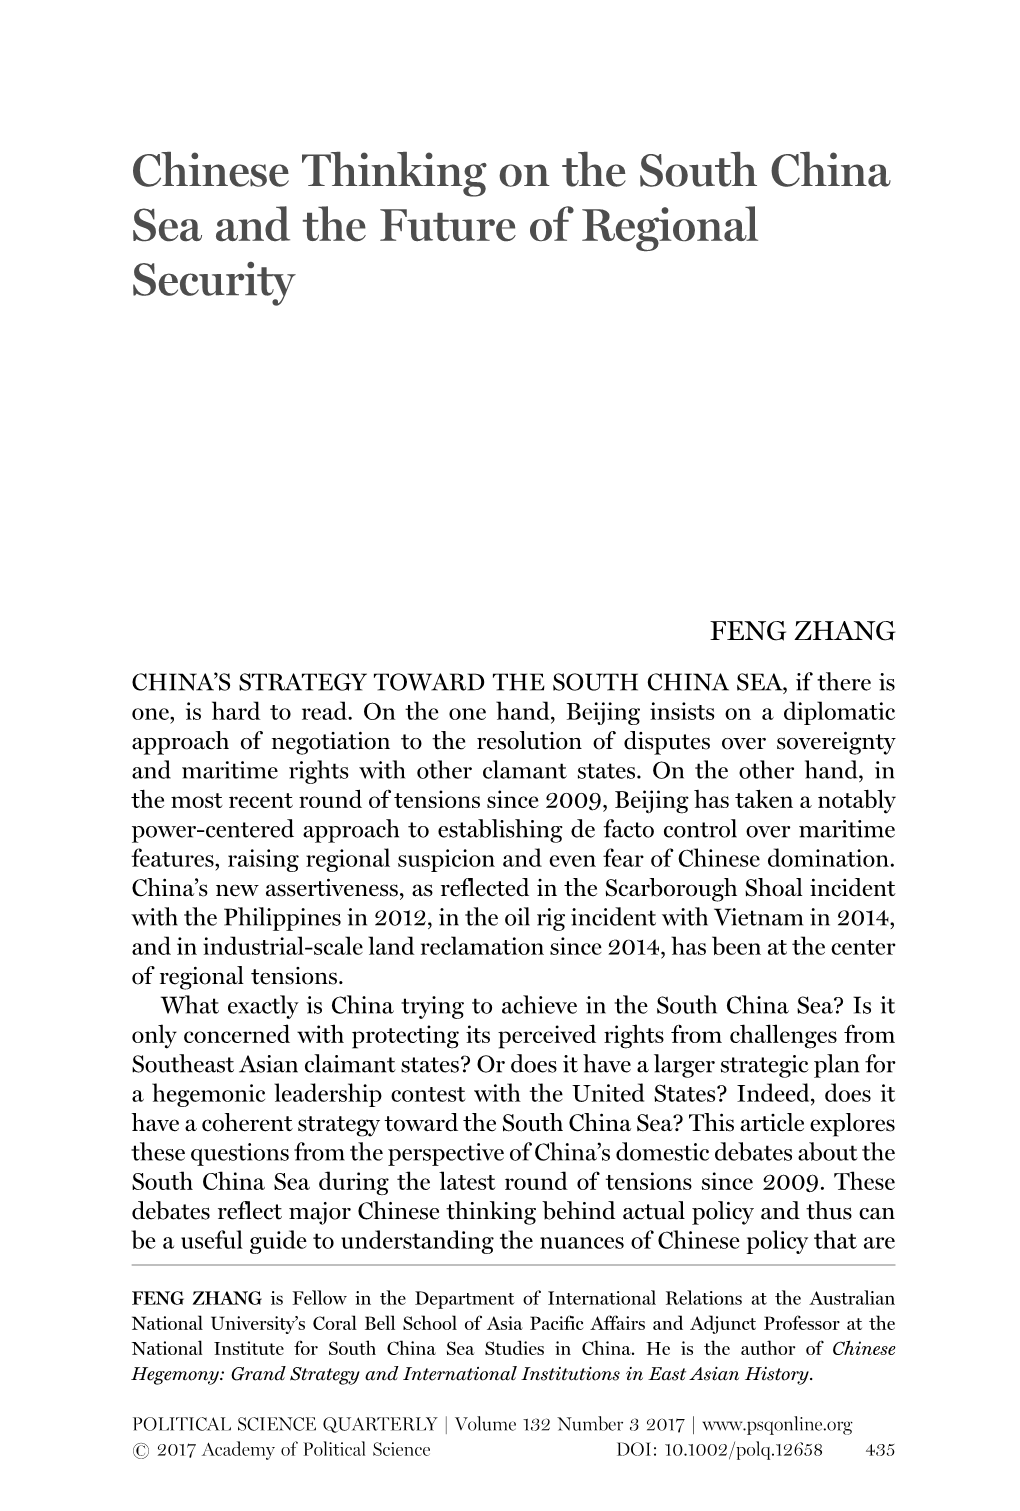 Chinese Thinking on the South China Sea and the Future of Regional Security